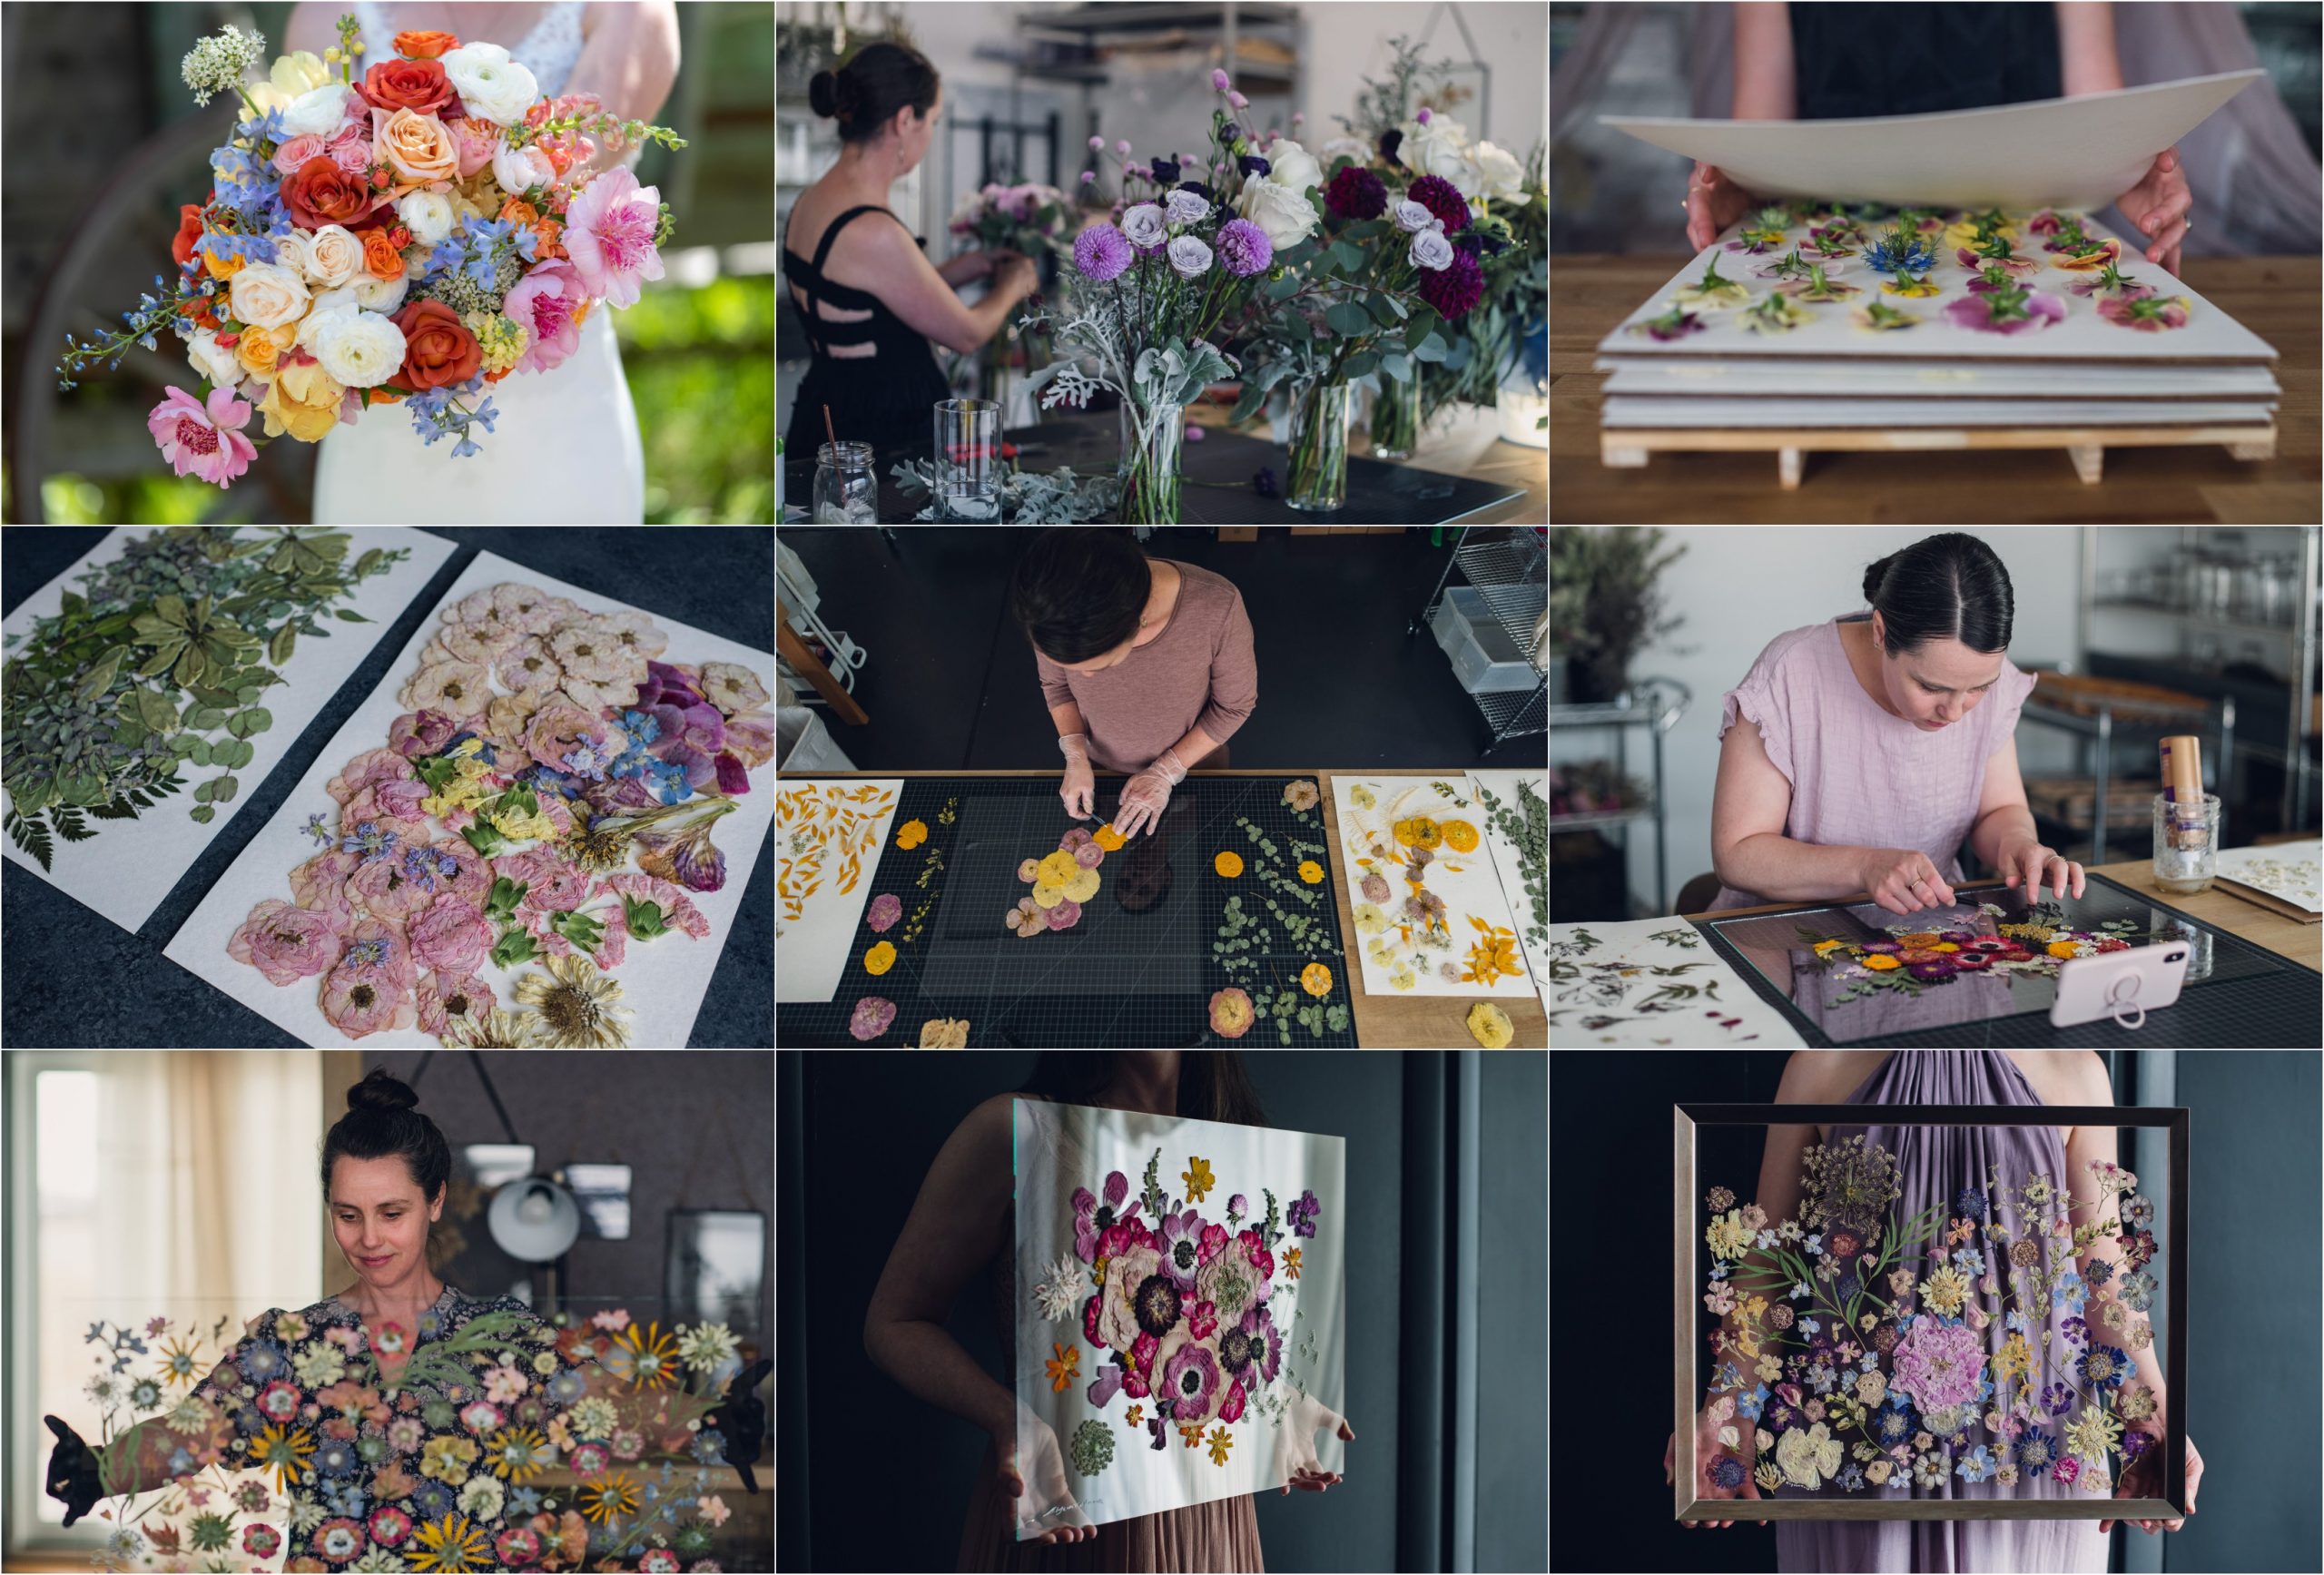 preservation process of a bouquet being deconstructed, pressed and arranged into art